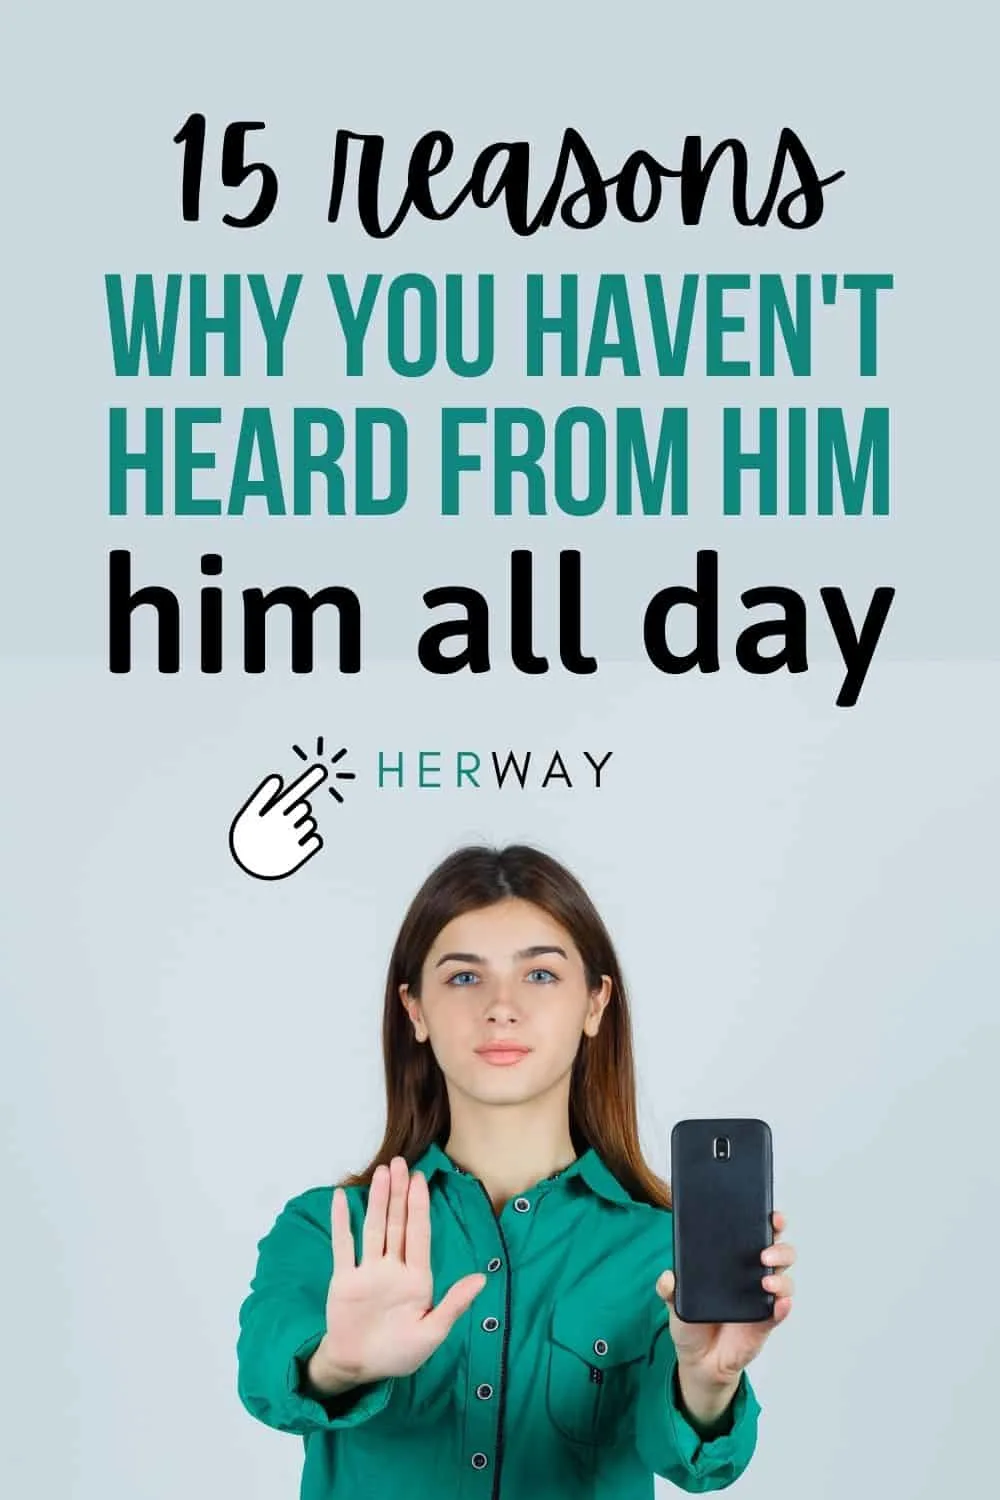 Why You Haven’t Heard From Him All Day (15 Surprising Reasons) Pinterest